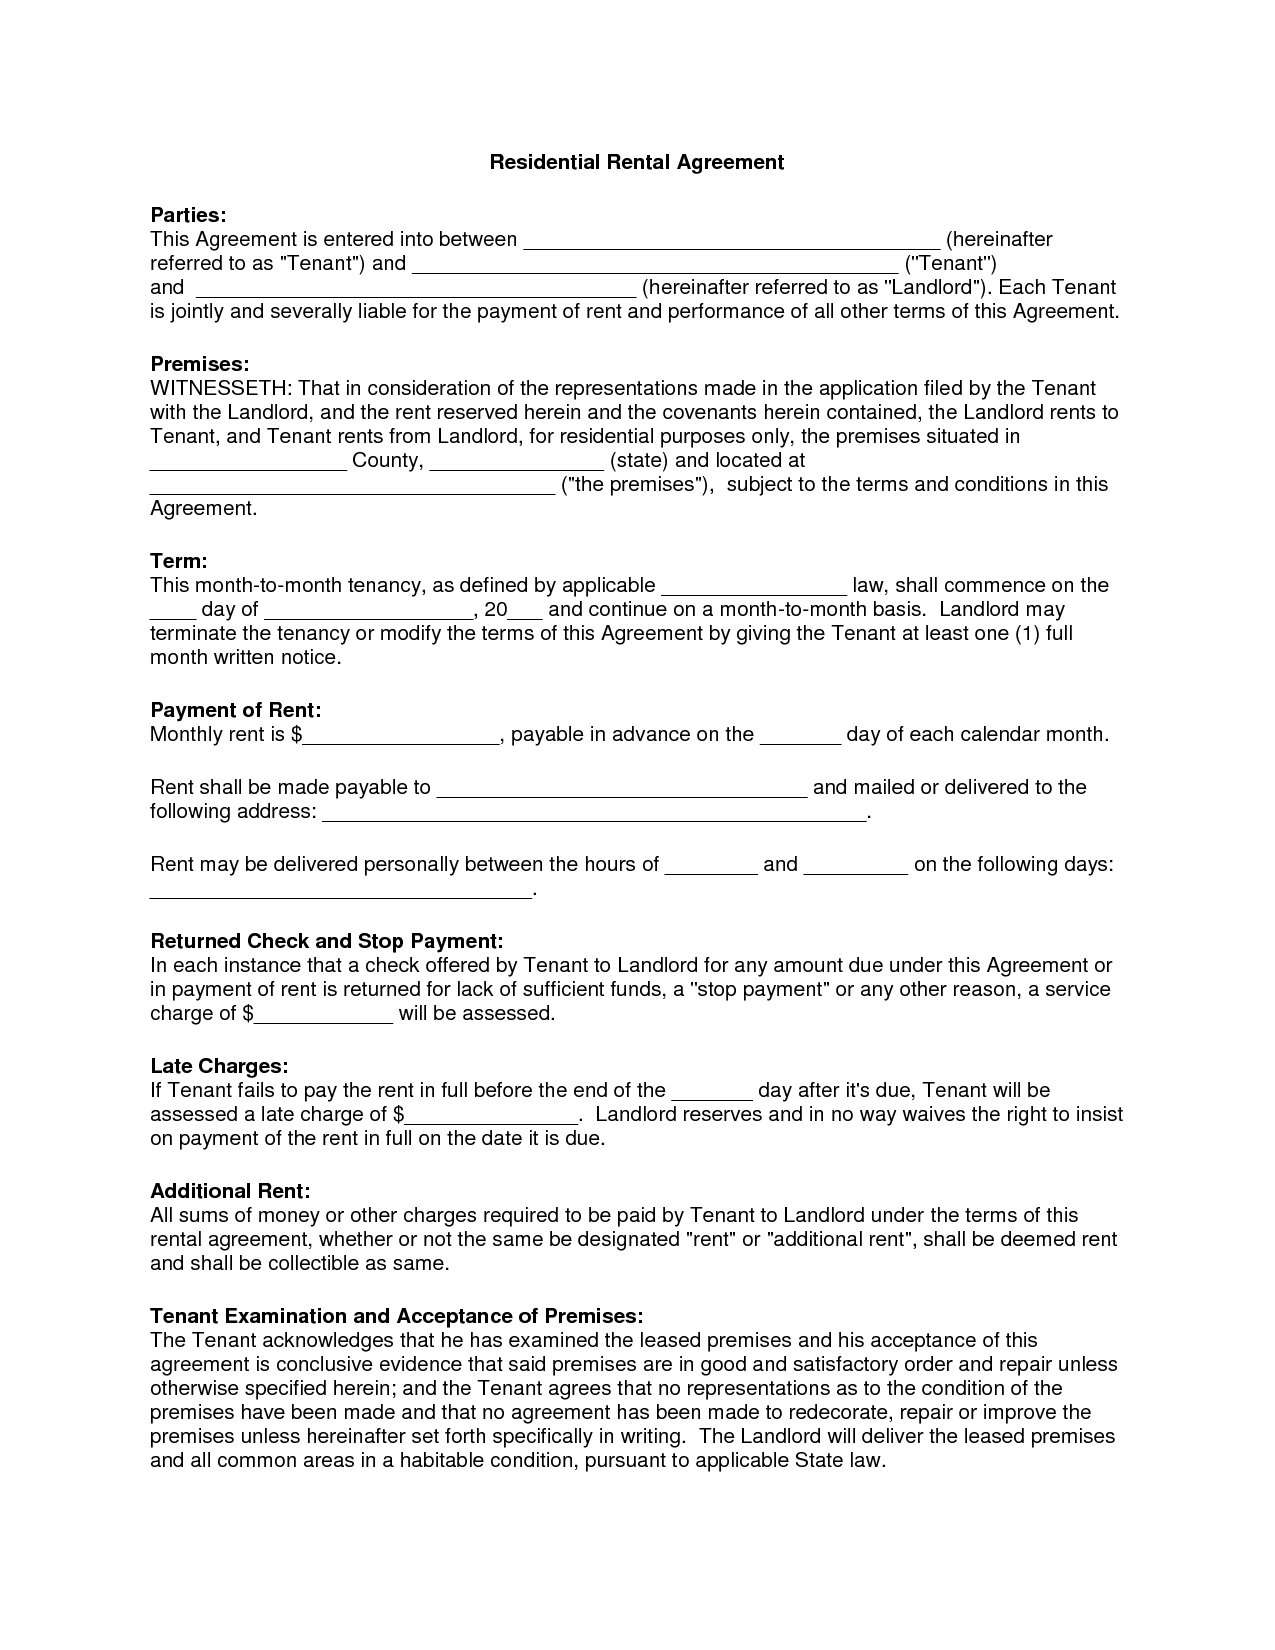 Free Copy Rental Lease Agreement | Residential Rental Agreement - Free Printable Rental Lease Agreement